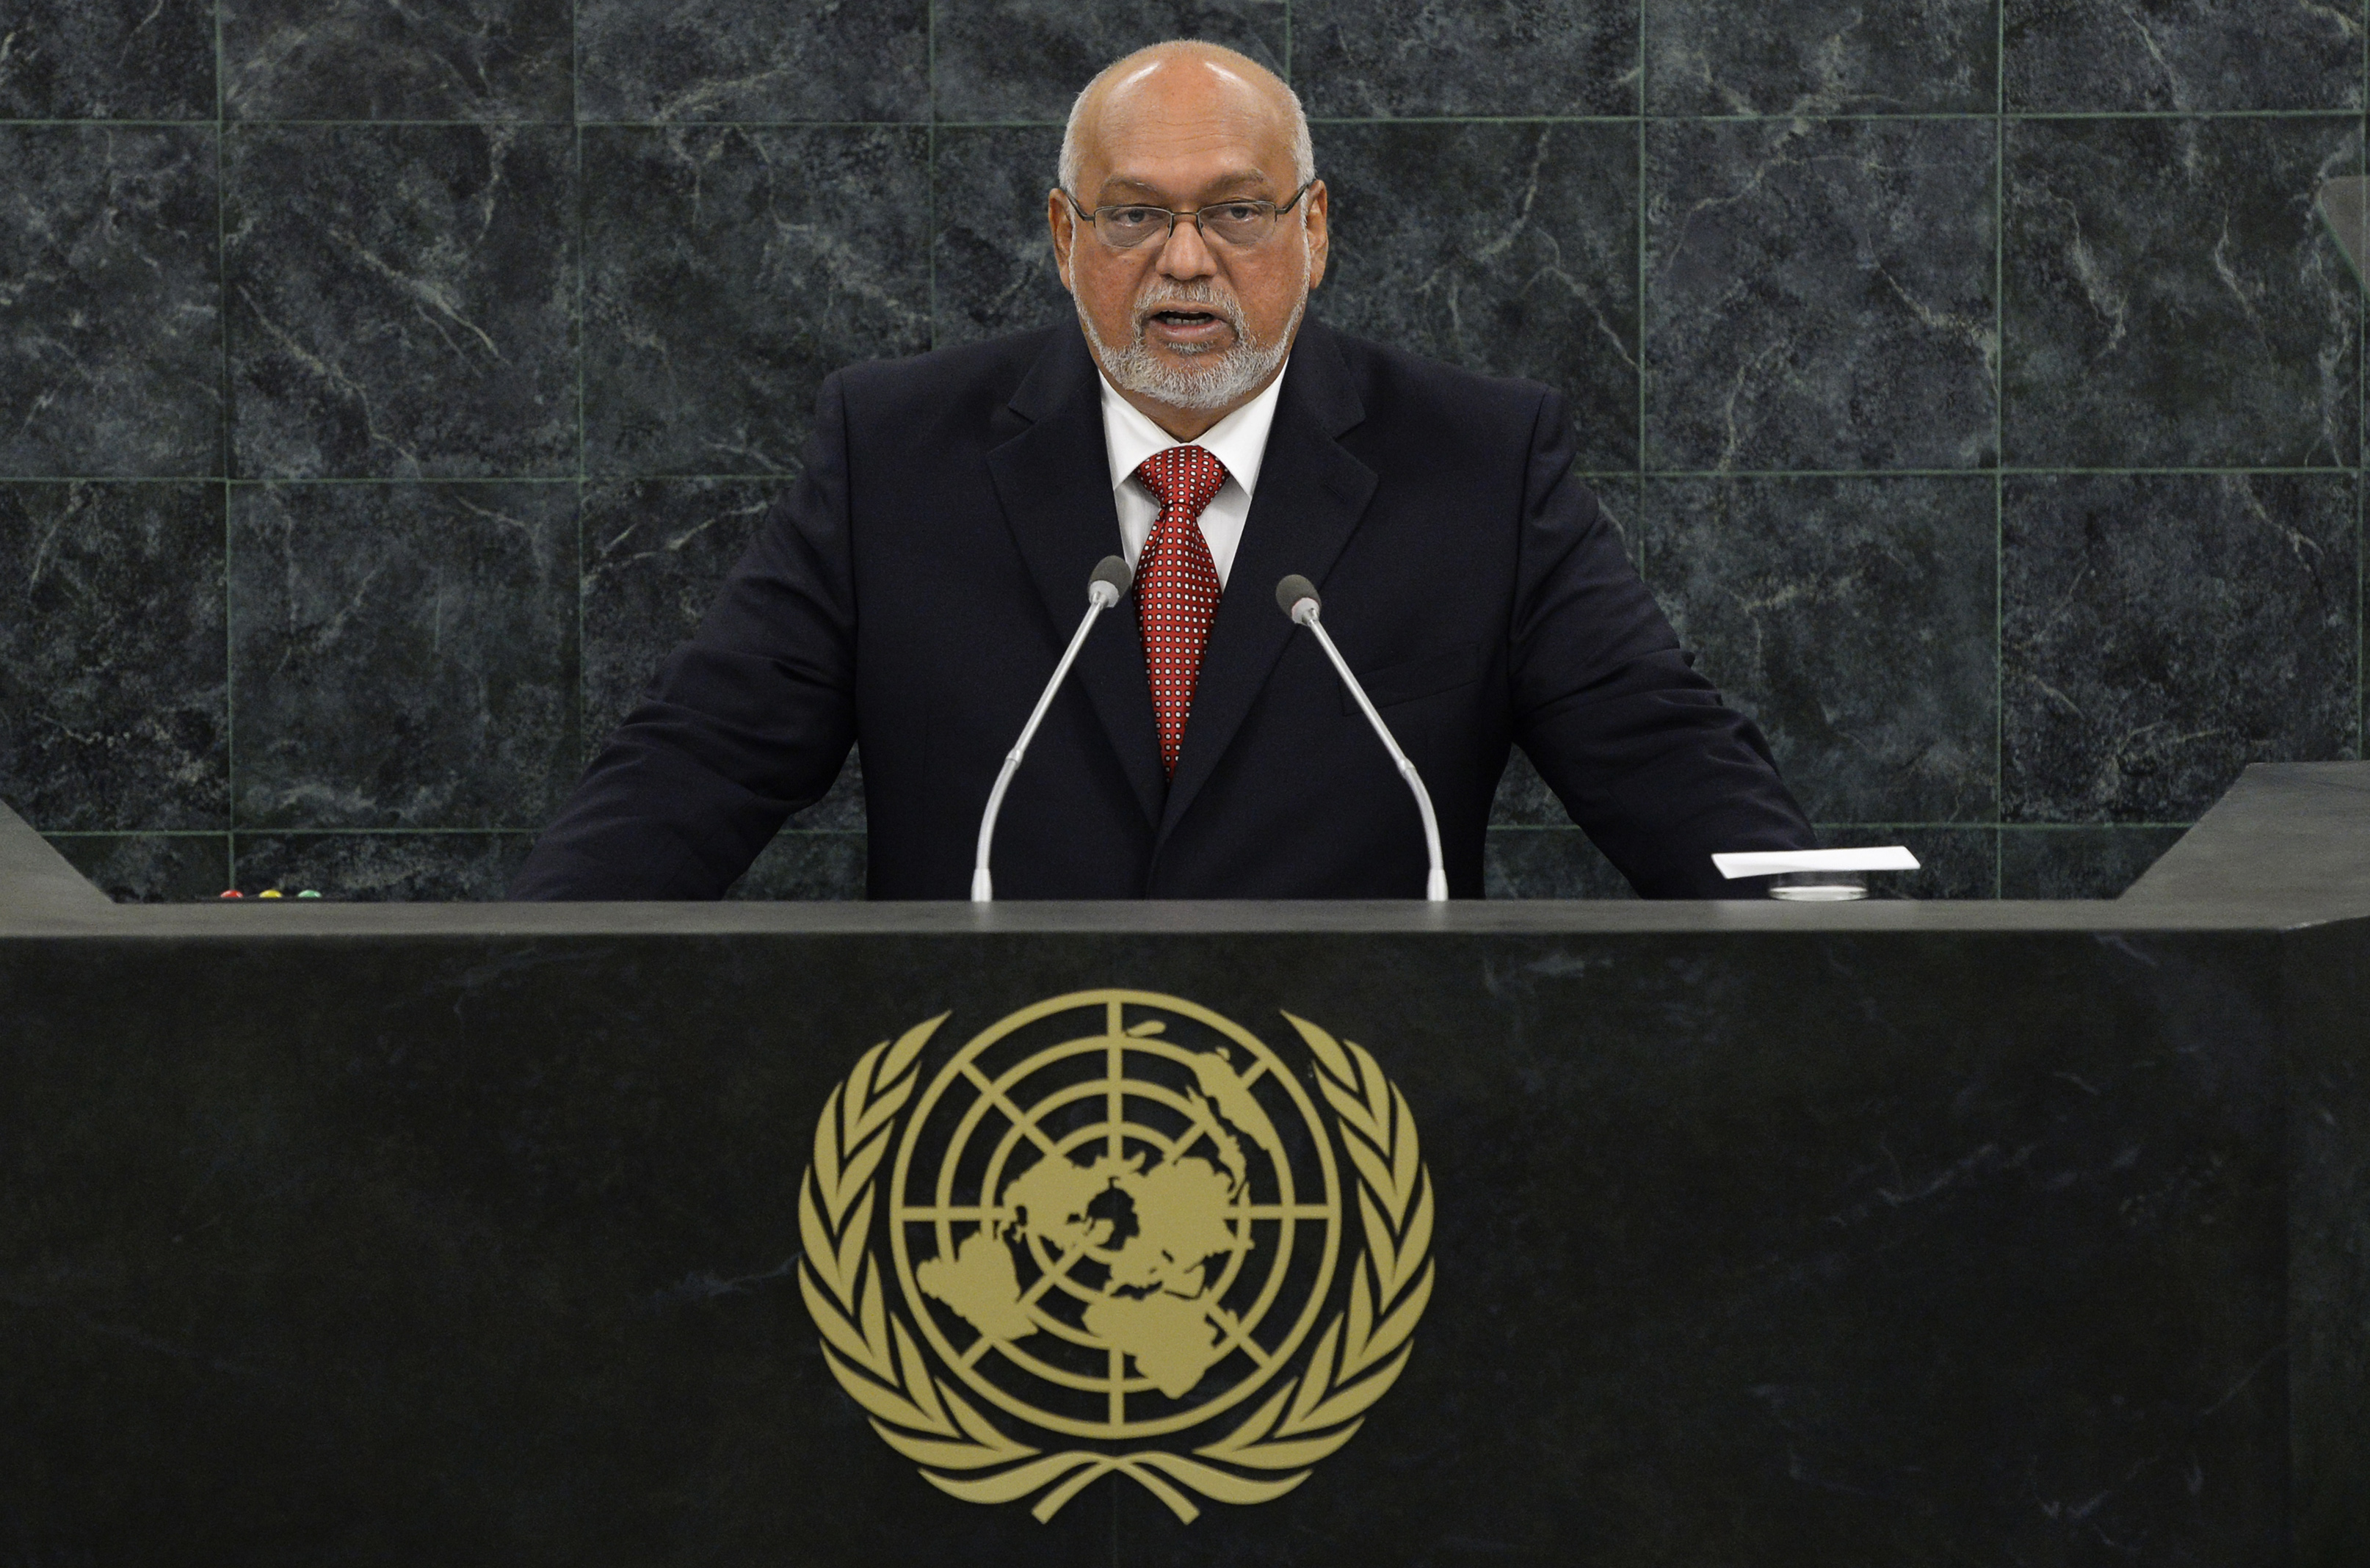 Donald Rabindranauth Ramotar, President of the Republic of Guyana, addresses the 68th United Nations General Assembly at U.N. headquarters in New York, September 26, 2013. (Mike Segar—Reuters)